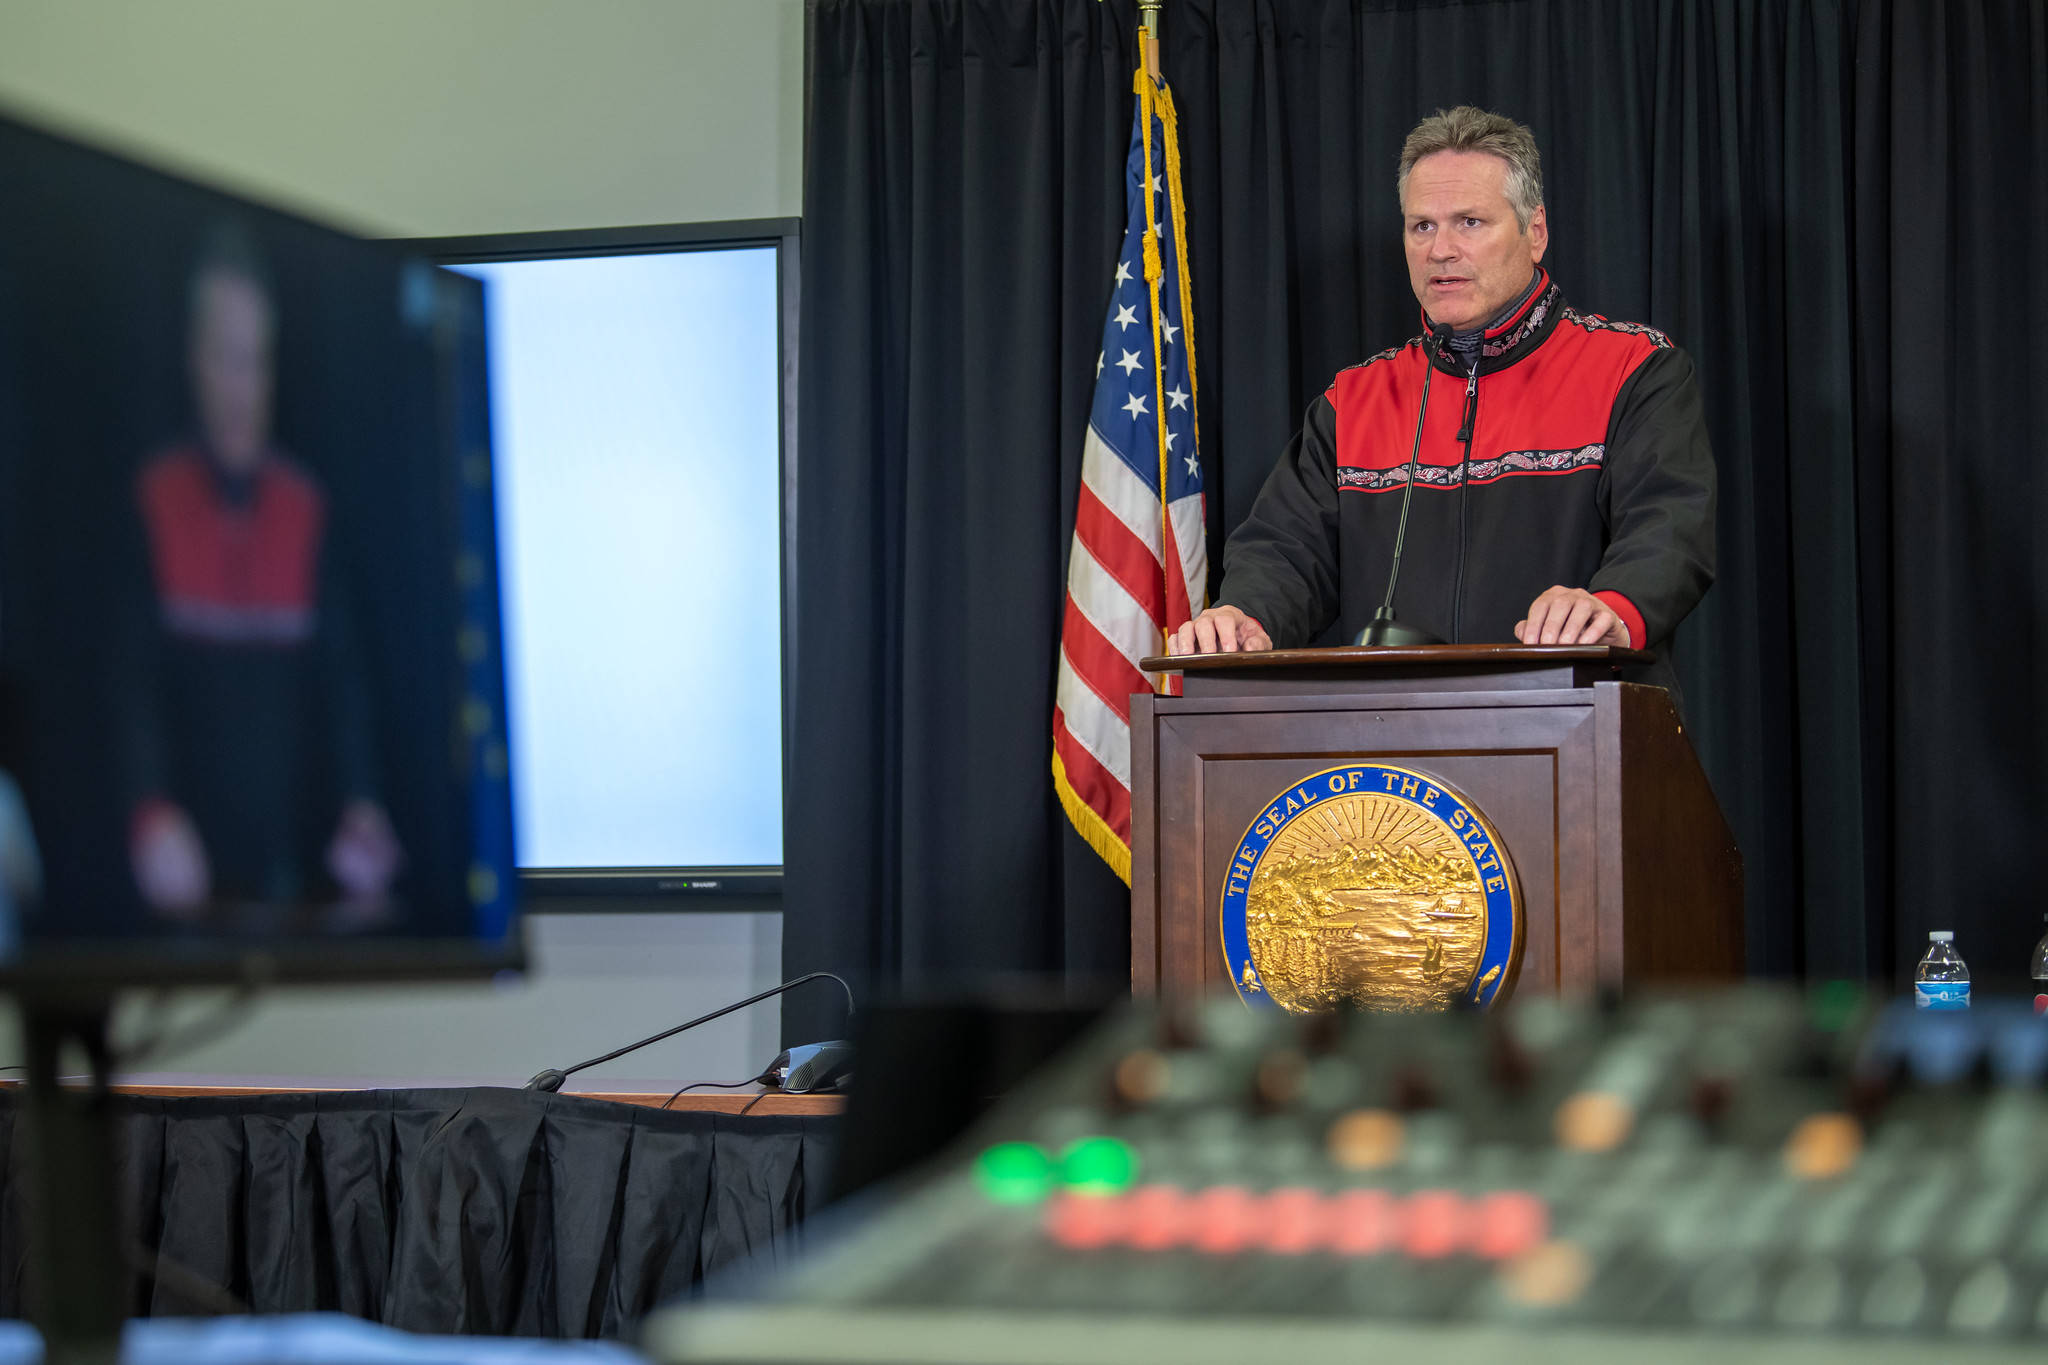 Gov. Mike Dunleavy at a press conference in Anchorage on Aug. 11, 2020. (Courtesy photo / Office of Gov. Mike Dunleavy)